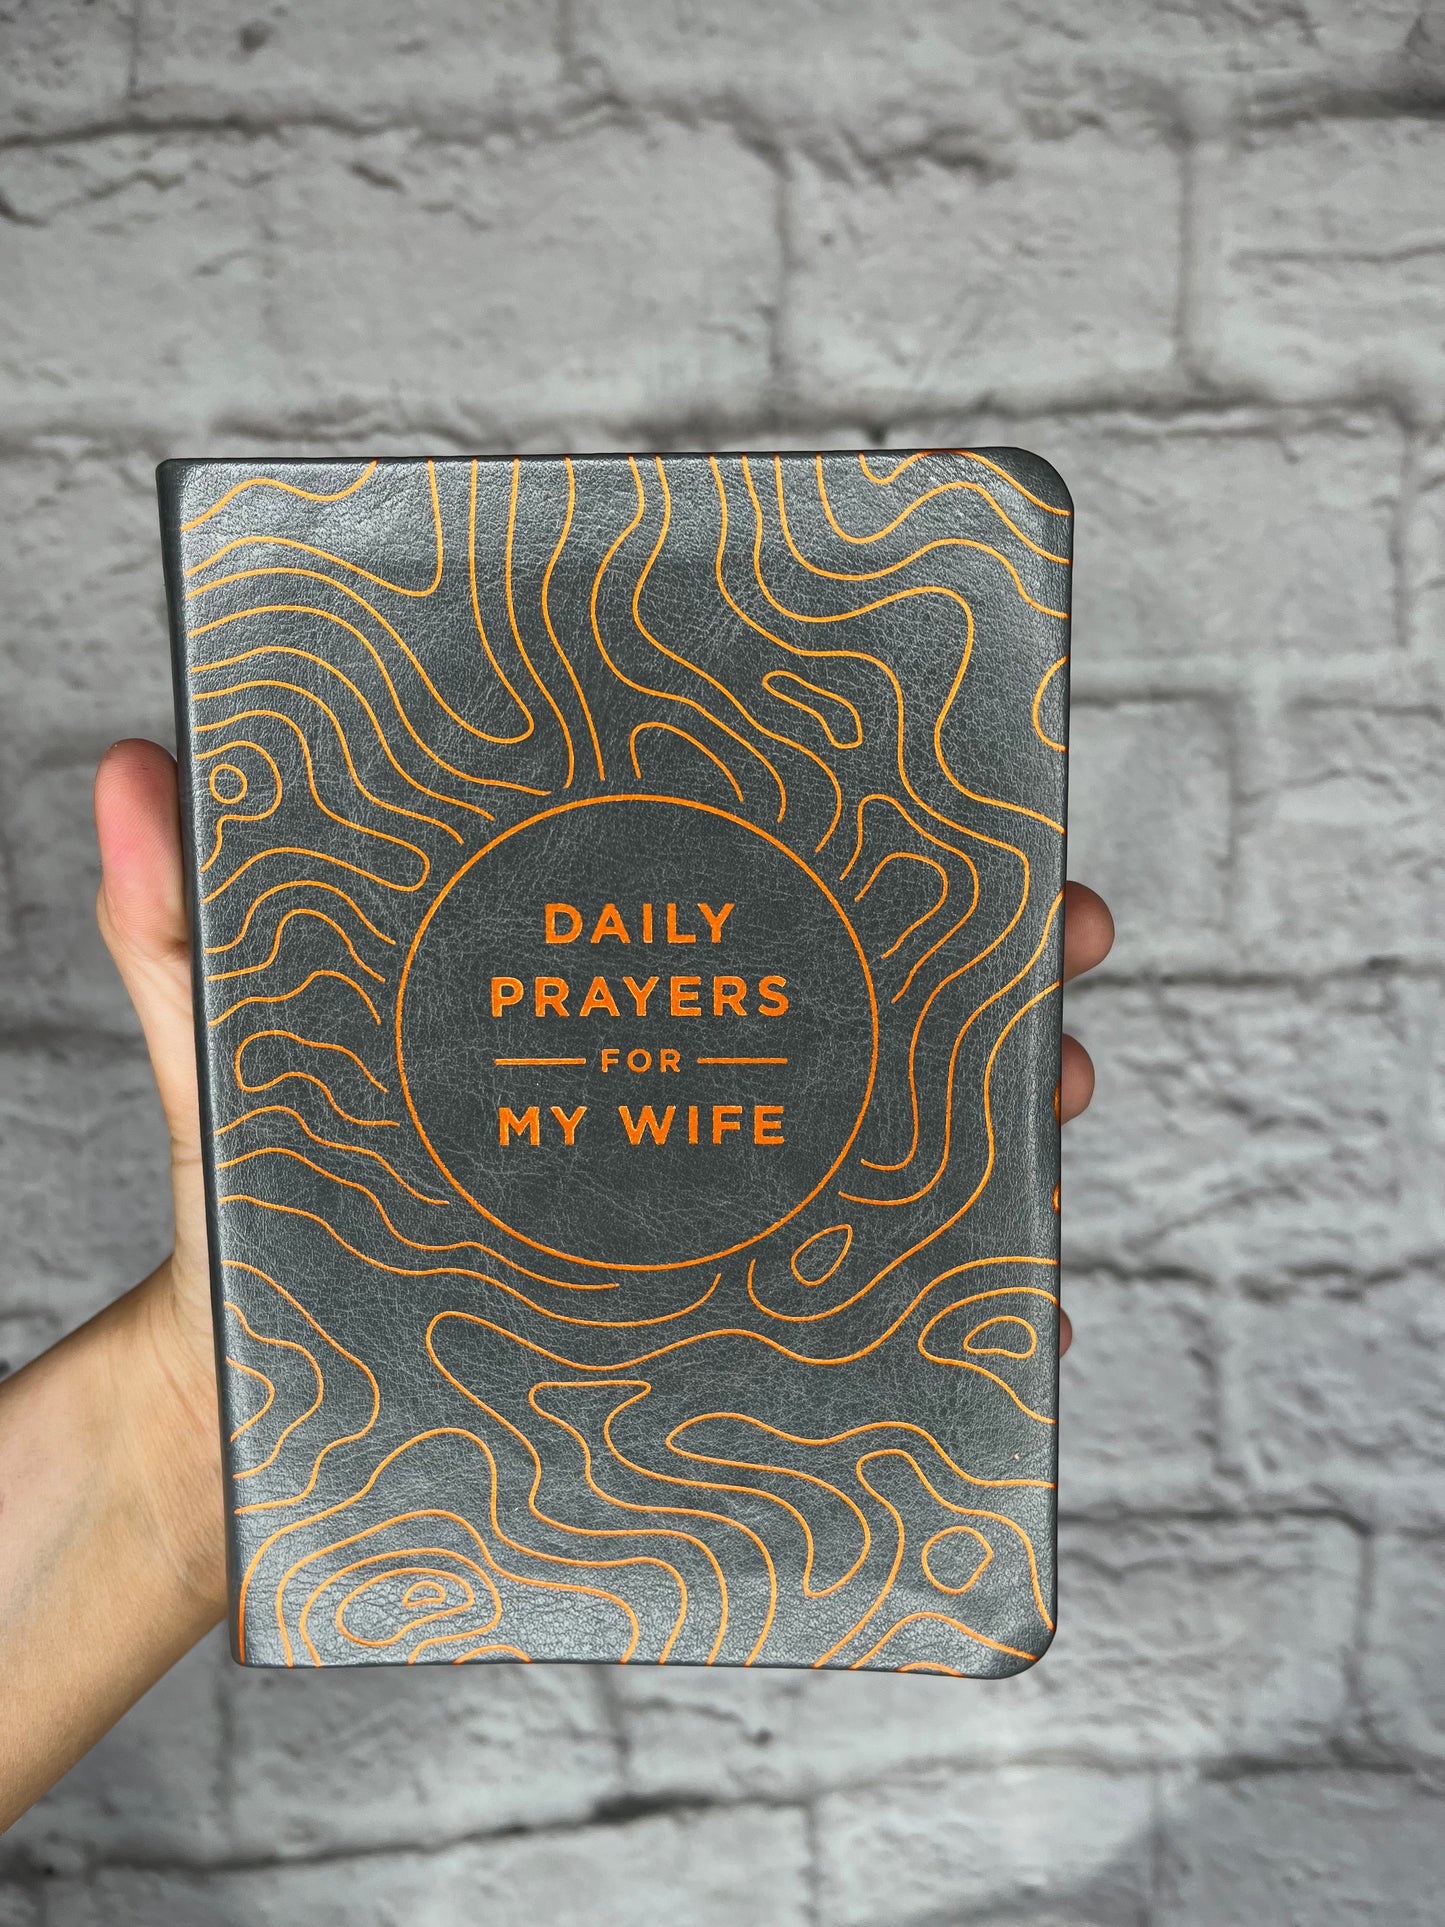 Daily Prayers for my Spouse Books